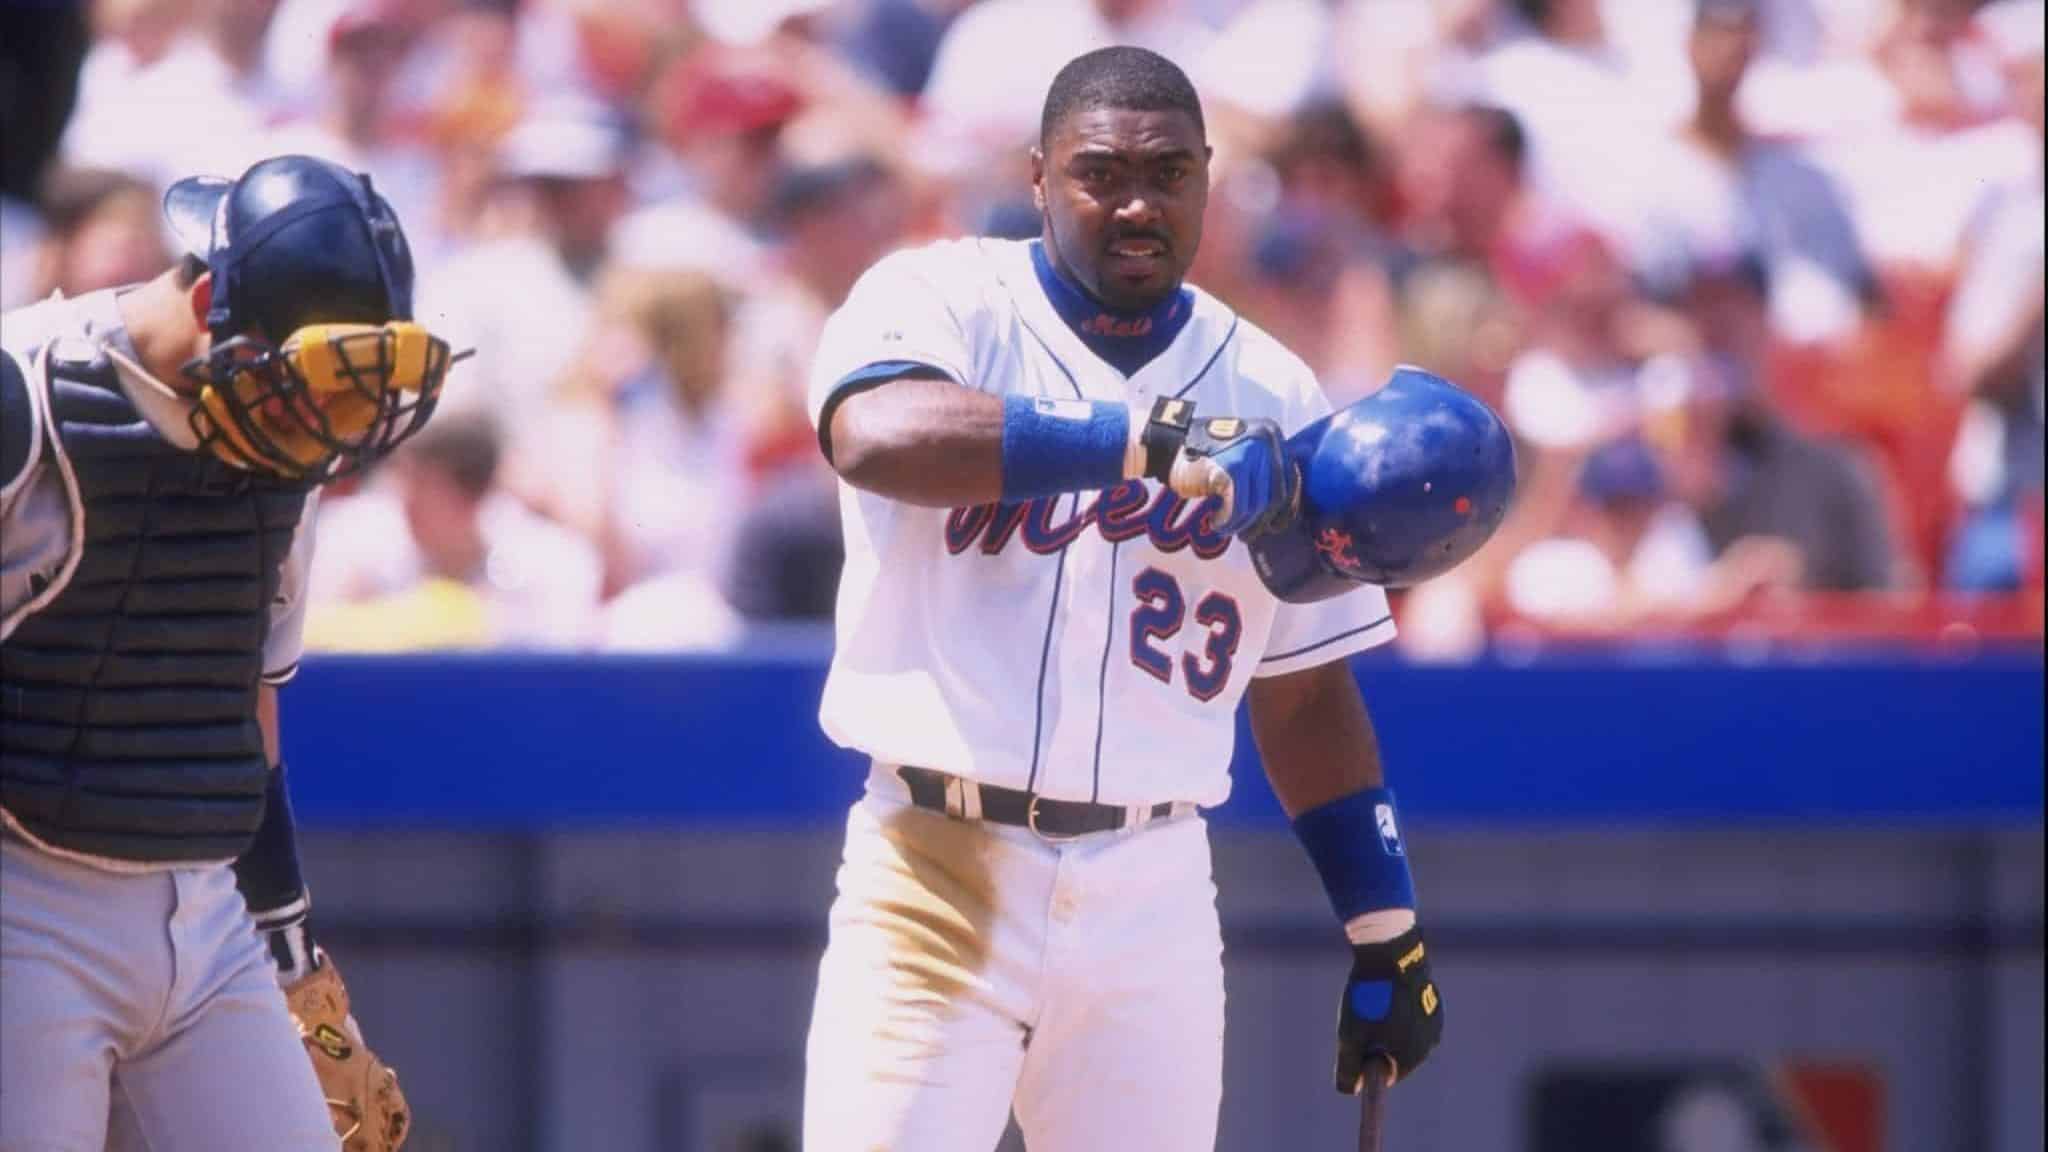 26 Jun 1998: Bernard Gilkey #23 of the New York Mets in action during an interleague game against the New York Yankees at Shea Stadium in Flushing, New York. The Yankees defeated the Mets 7-2.